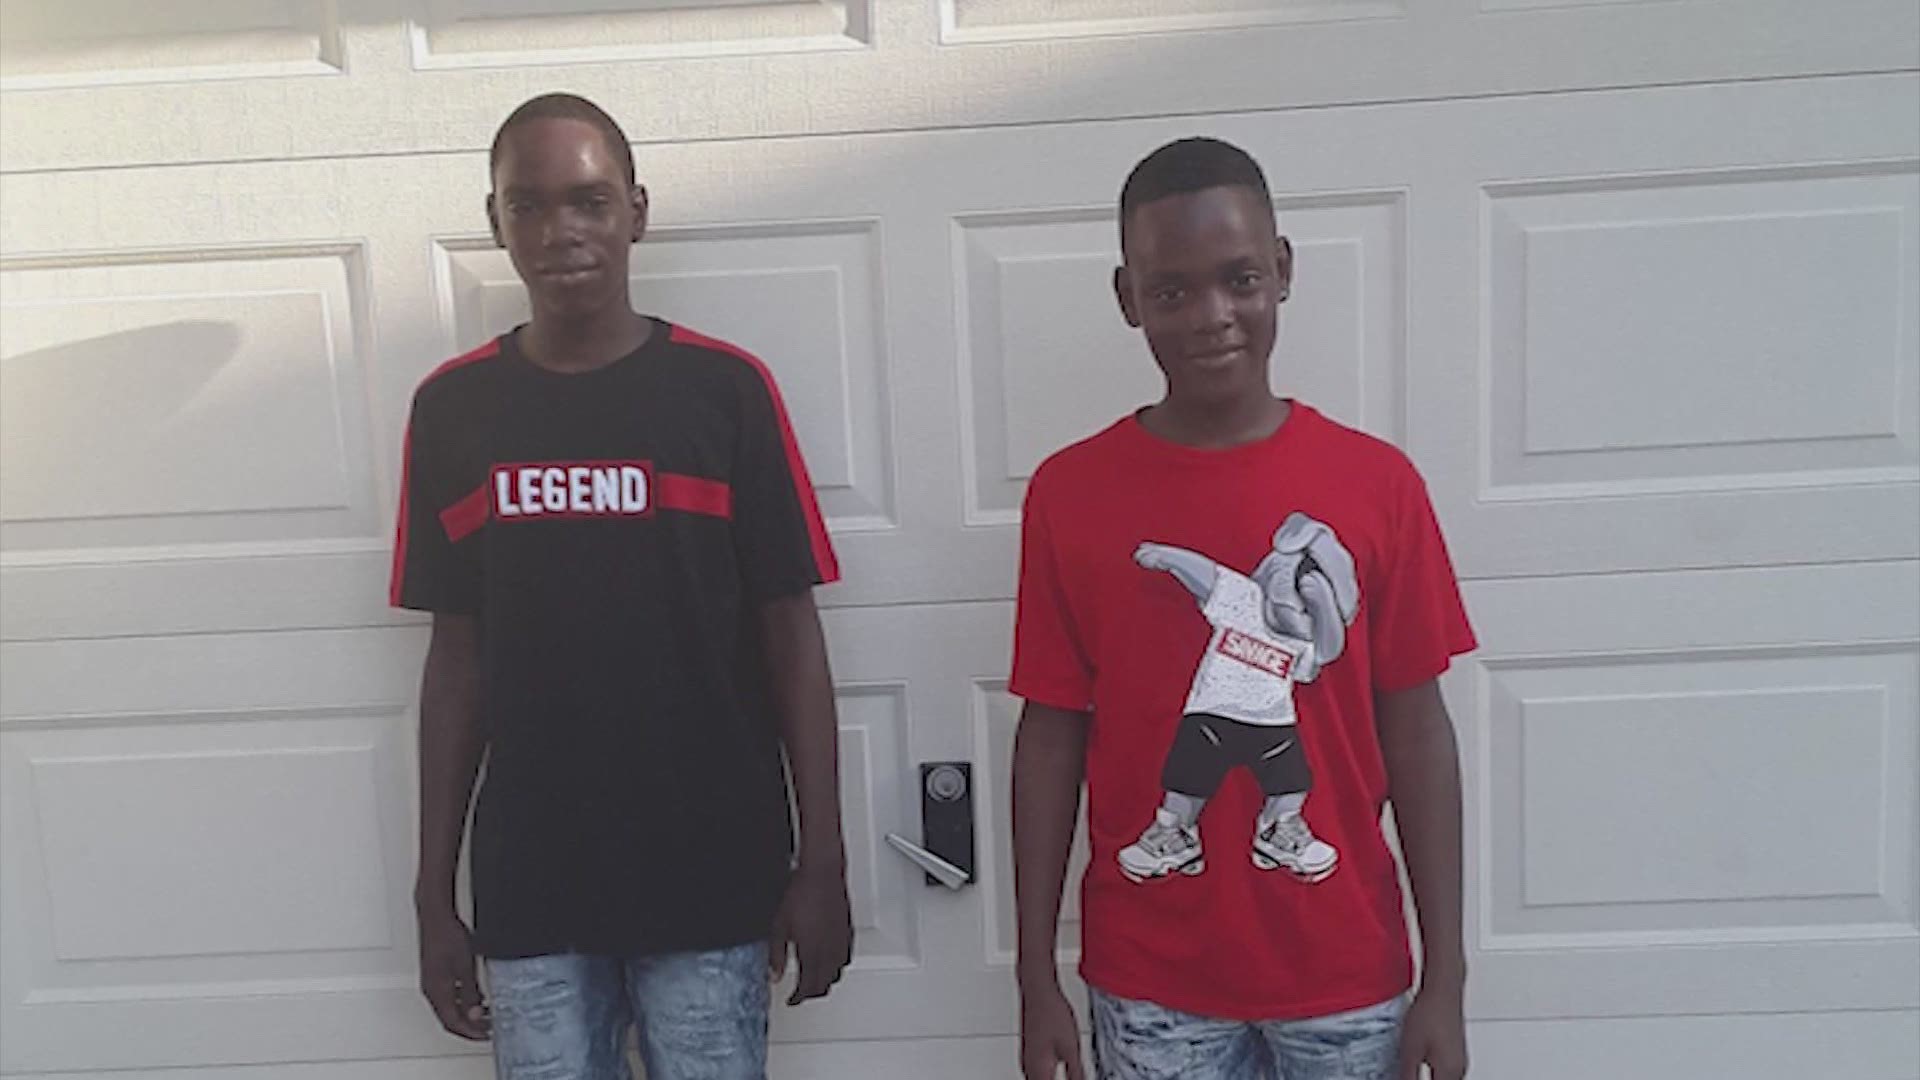 The mother of DeCarerick Kennedy and Faybian Hoisington said her two sons were killed in the crash at the street takeover event last weekend.